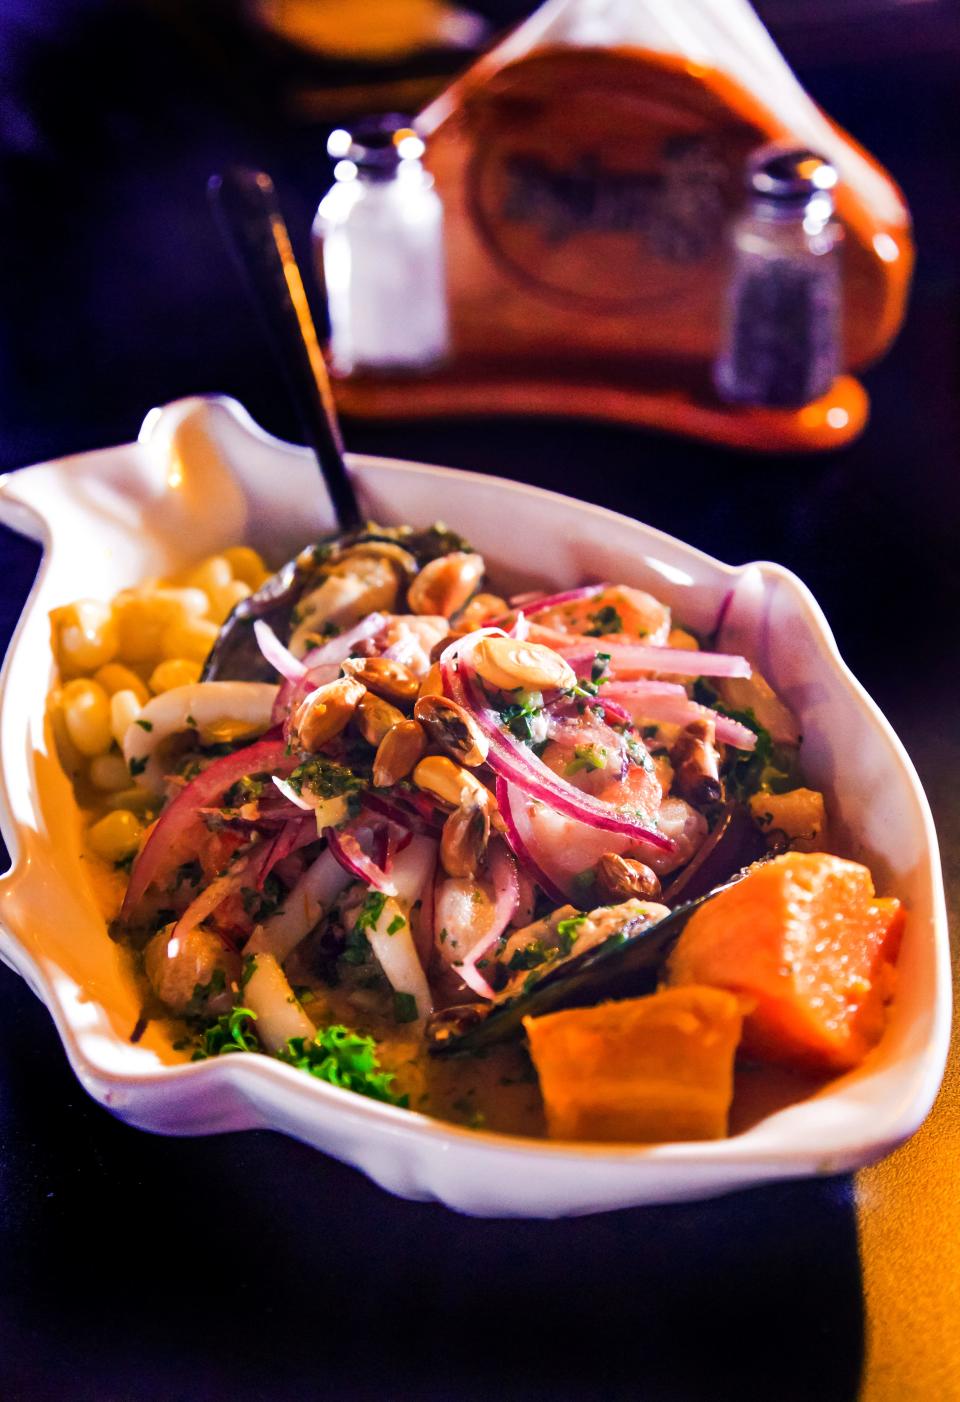 Ceviche Mixto at Peruvian restaurant Naylamp in Warr Acres. [Photo by Chris Landsberger, The Oklahoman]